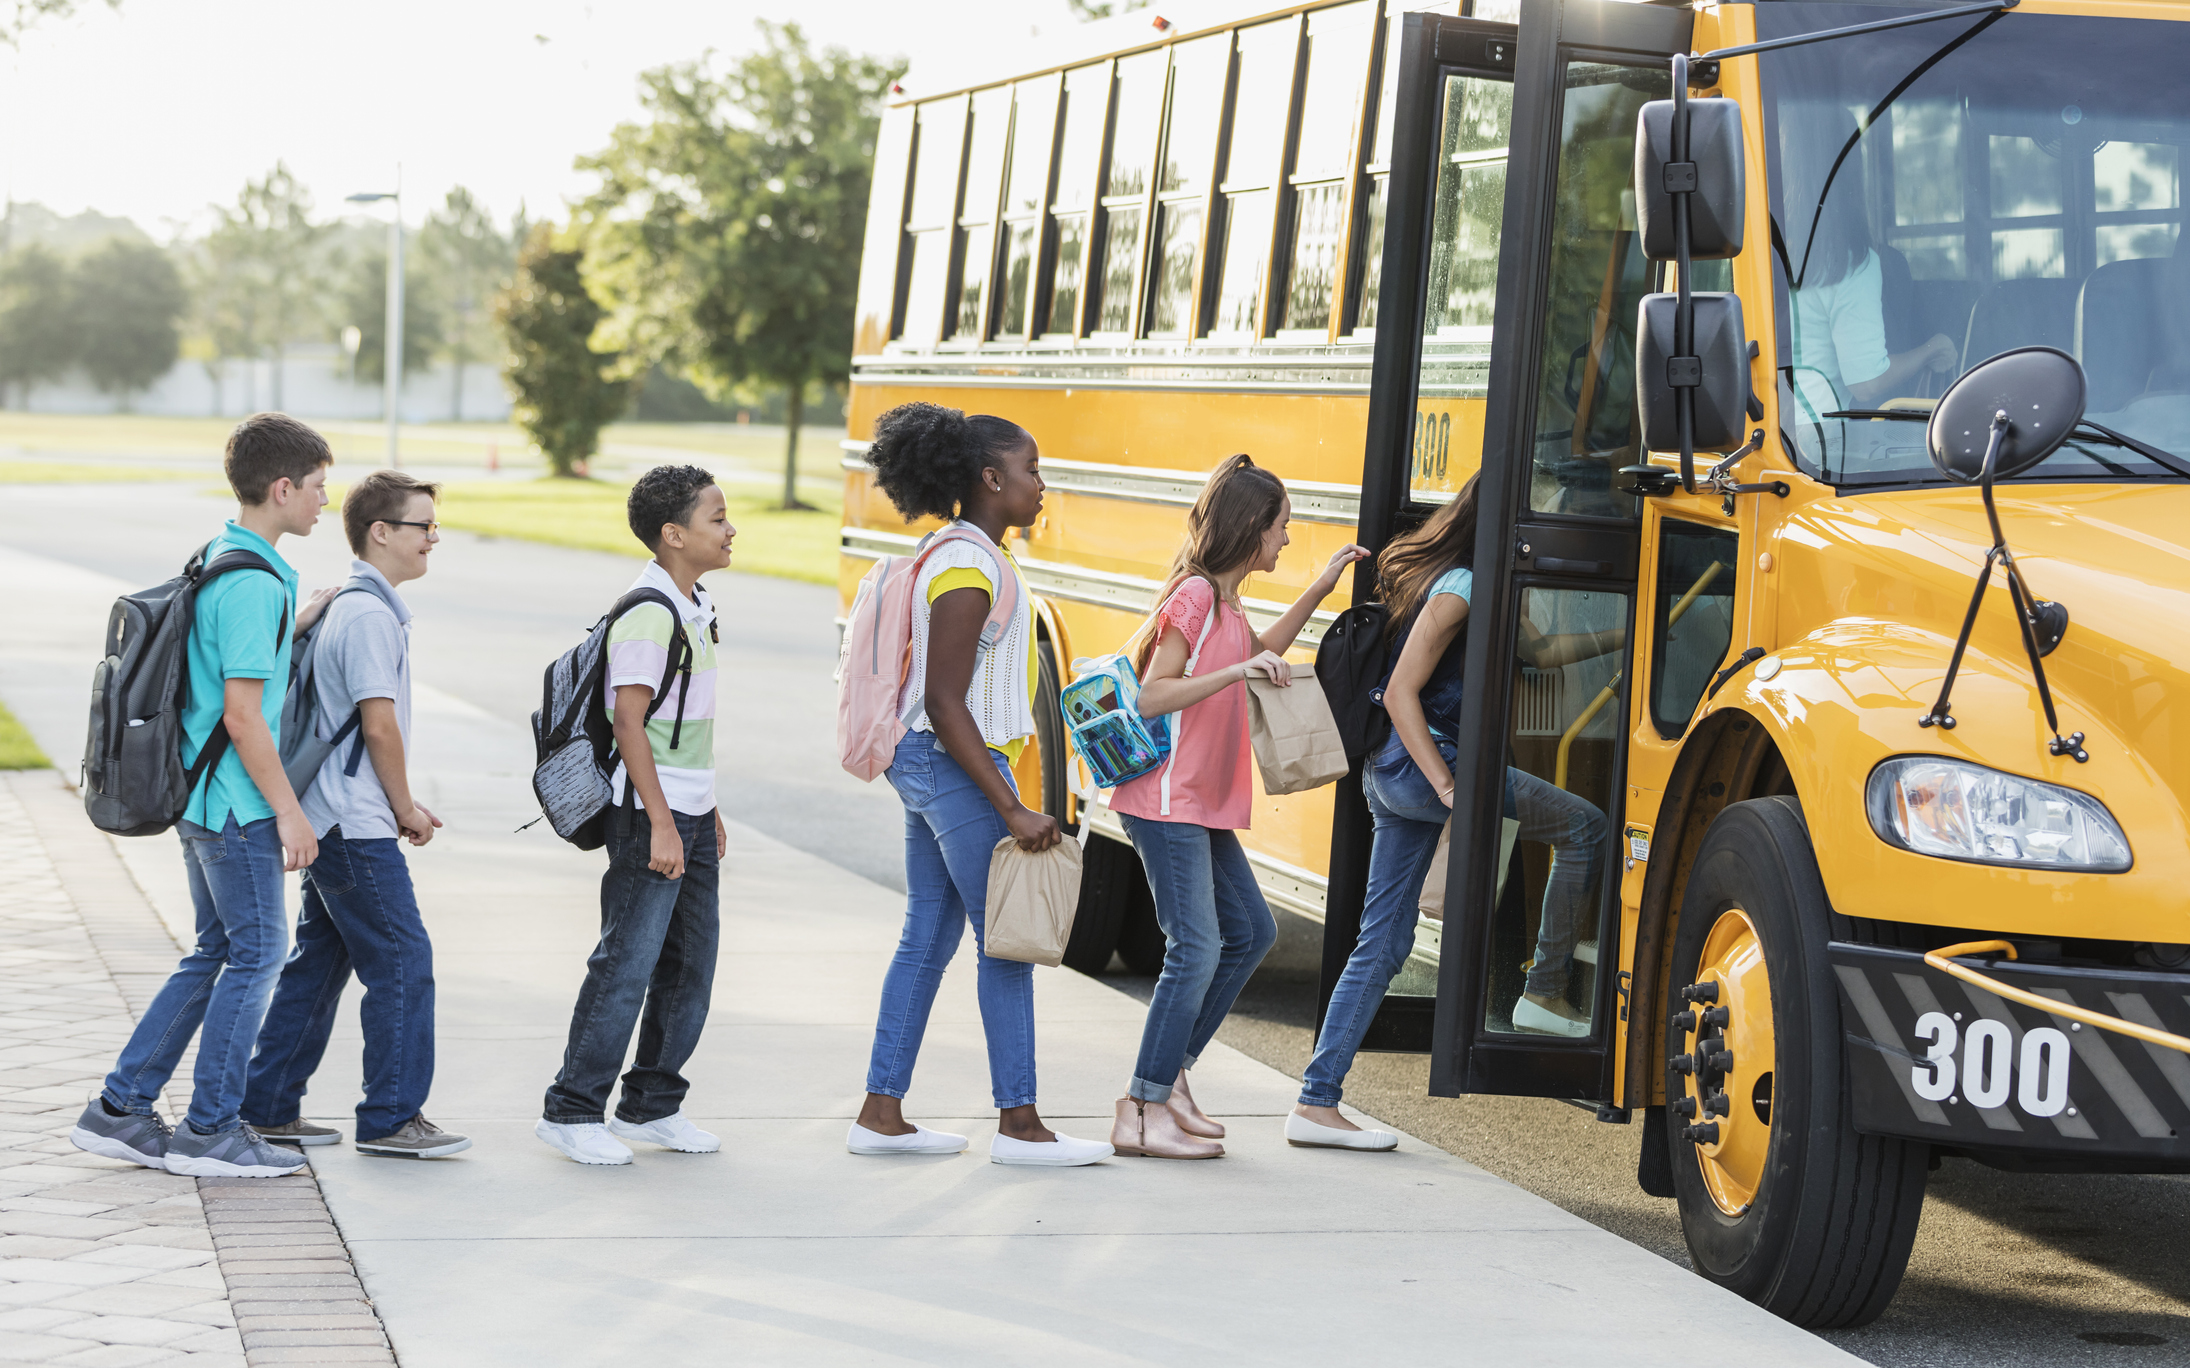 Middle school students boarding a bus